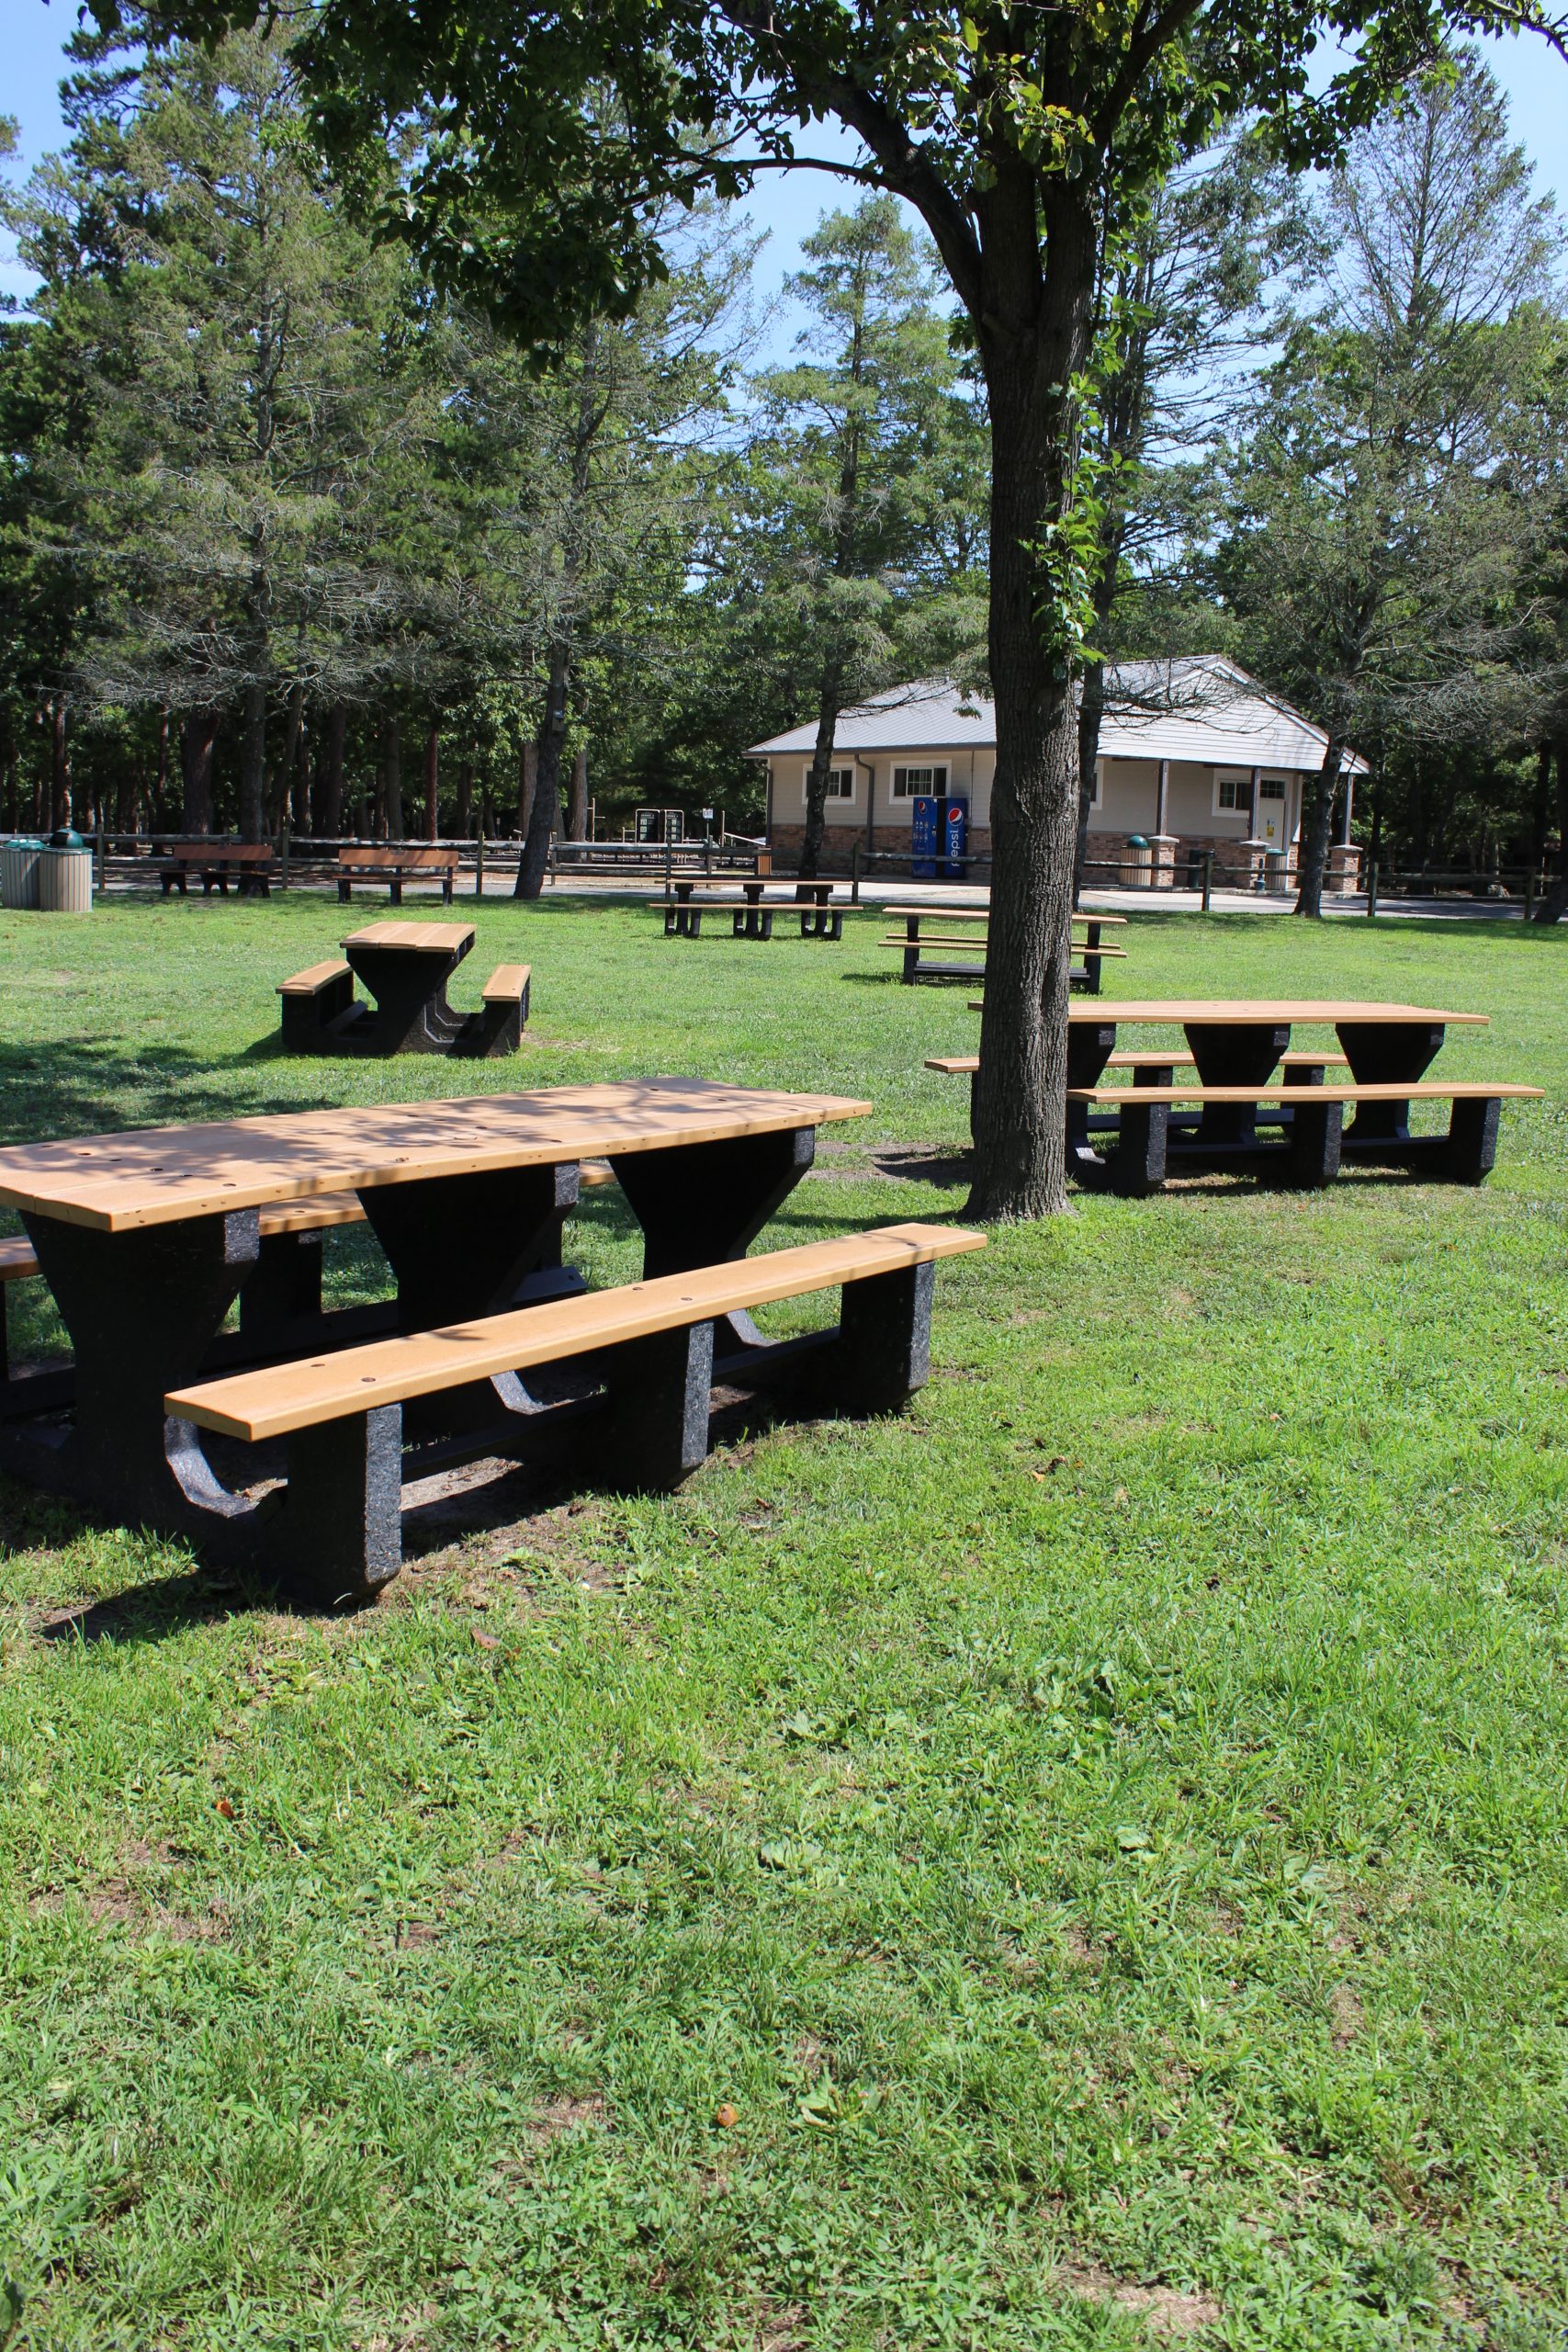 Picnic tables under trees at Cape May County Park in Cape May Court House NJ